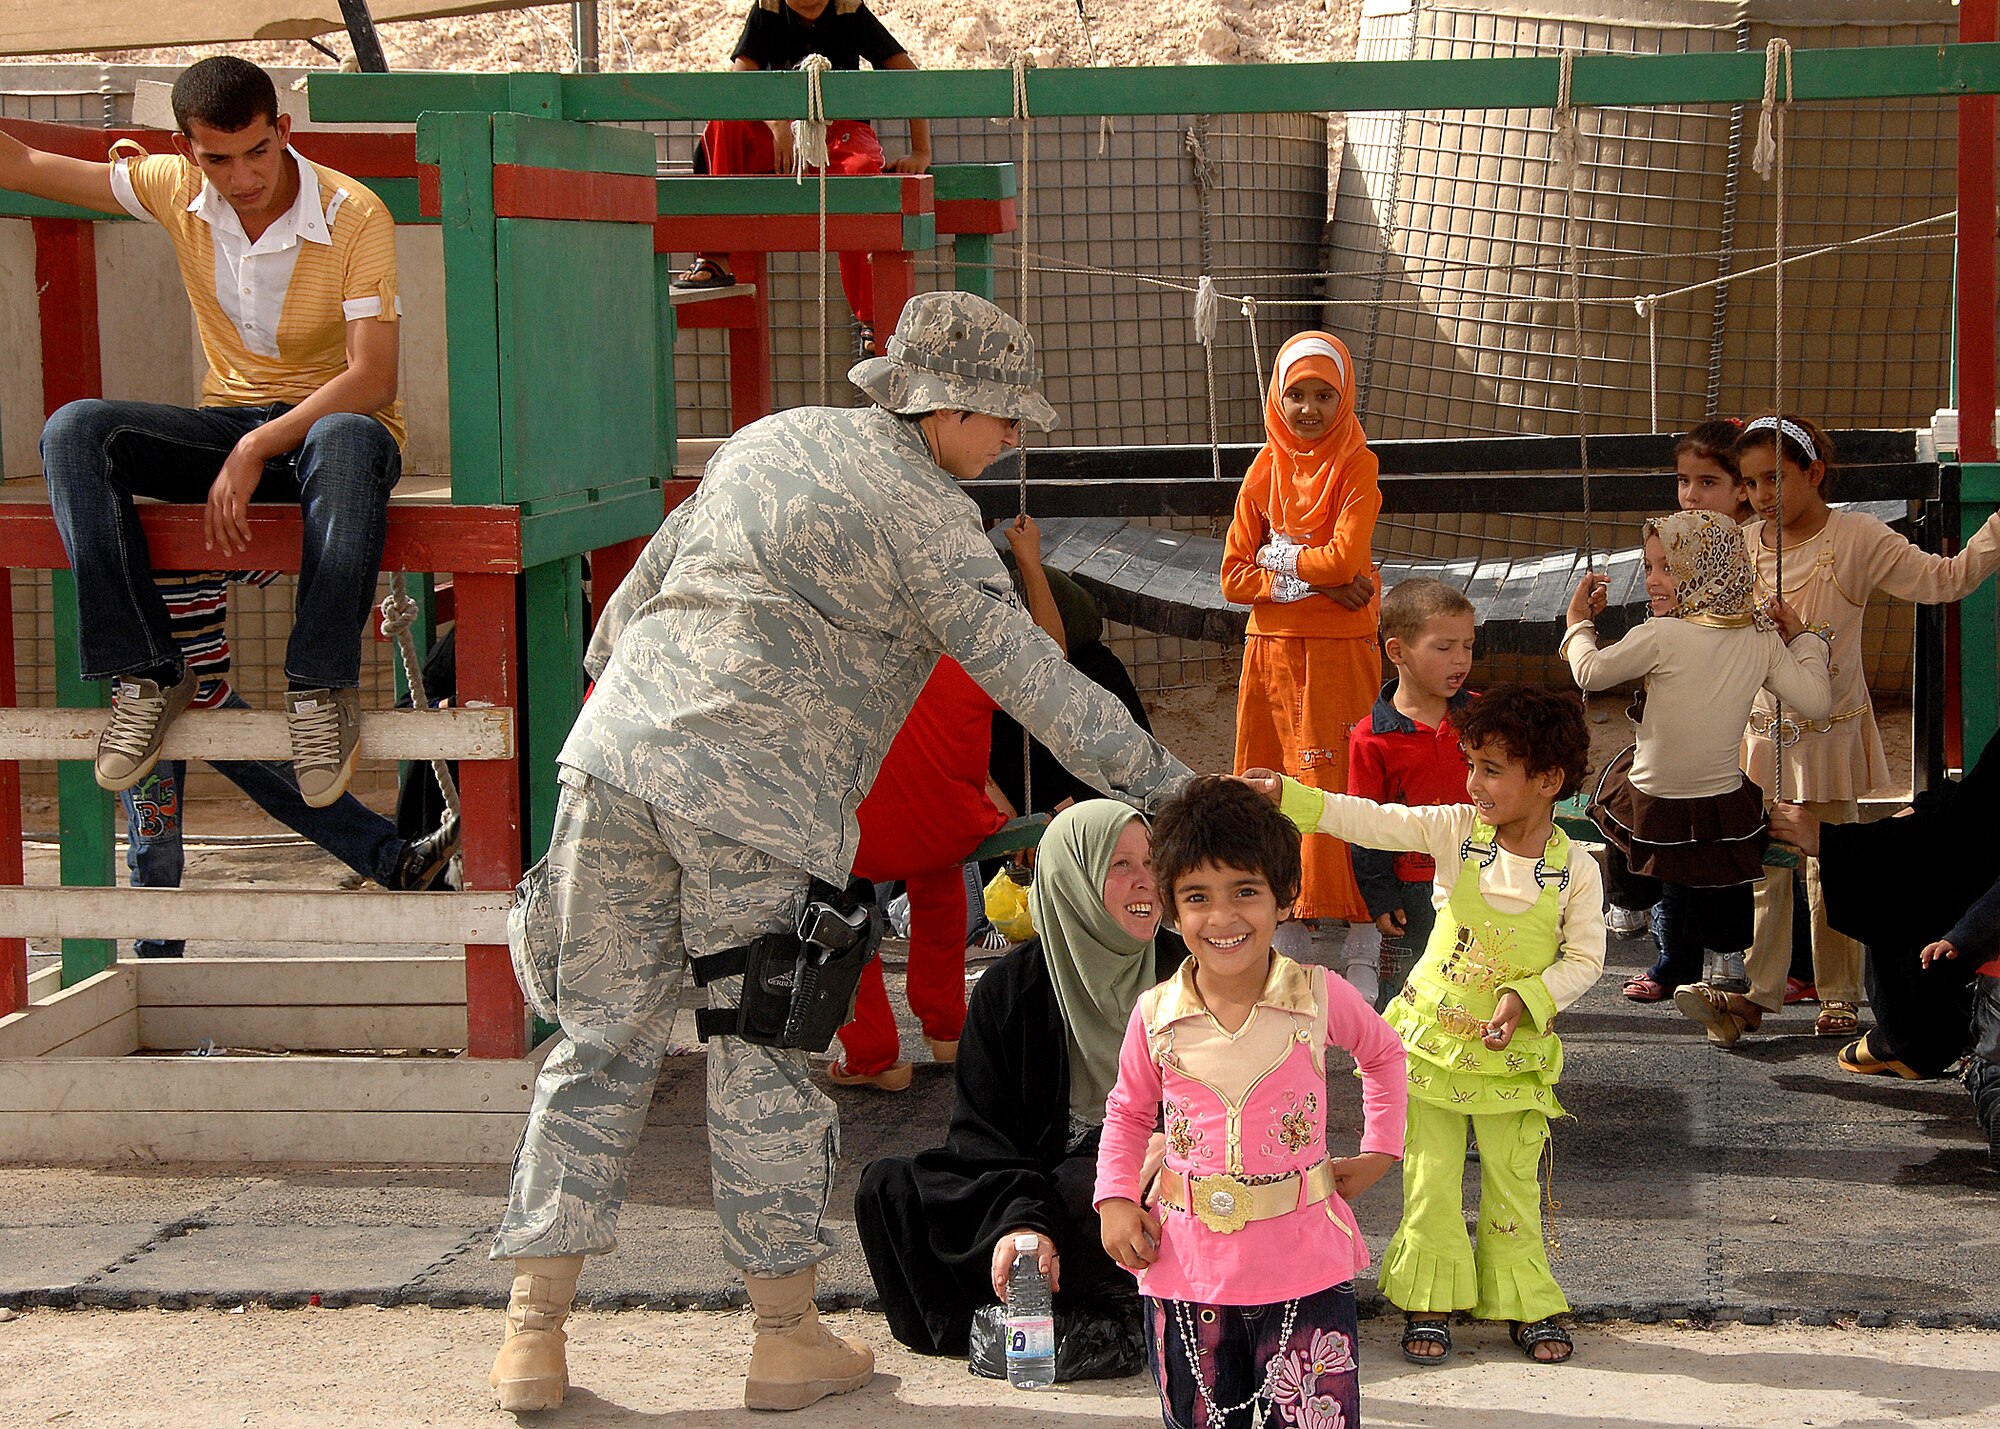 A security forces member from the 586th Air Expeditionary Group plays with Iraqi children at Camp Bucca, Iraq, while they wait for transport to the detainee visitation center recently. The 586th AEG provides security and transport to the center for nearly 400 visitors who are allowed to visit daily with detainees being held at the theater internment facility. (U.S. Air Force photo/Tech. Sgt. Raheem Moore)